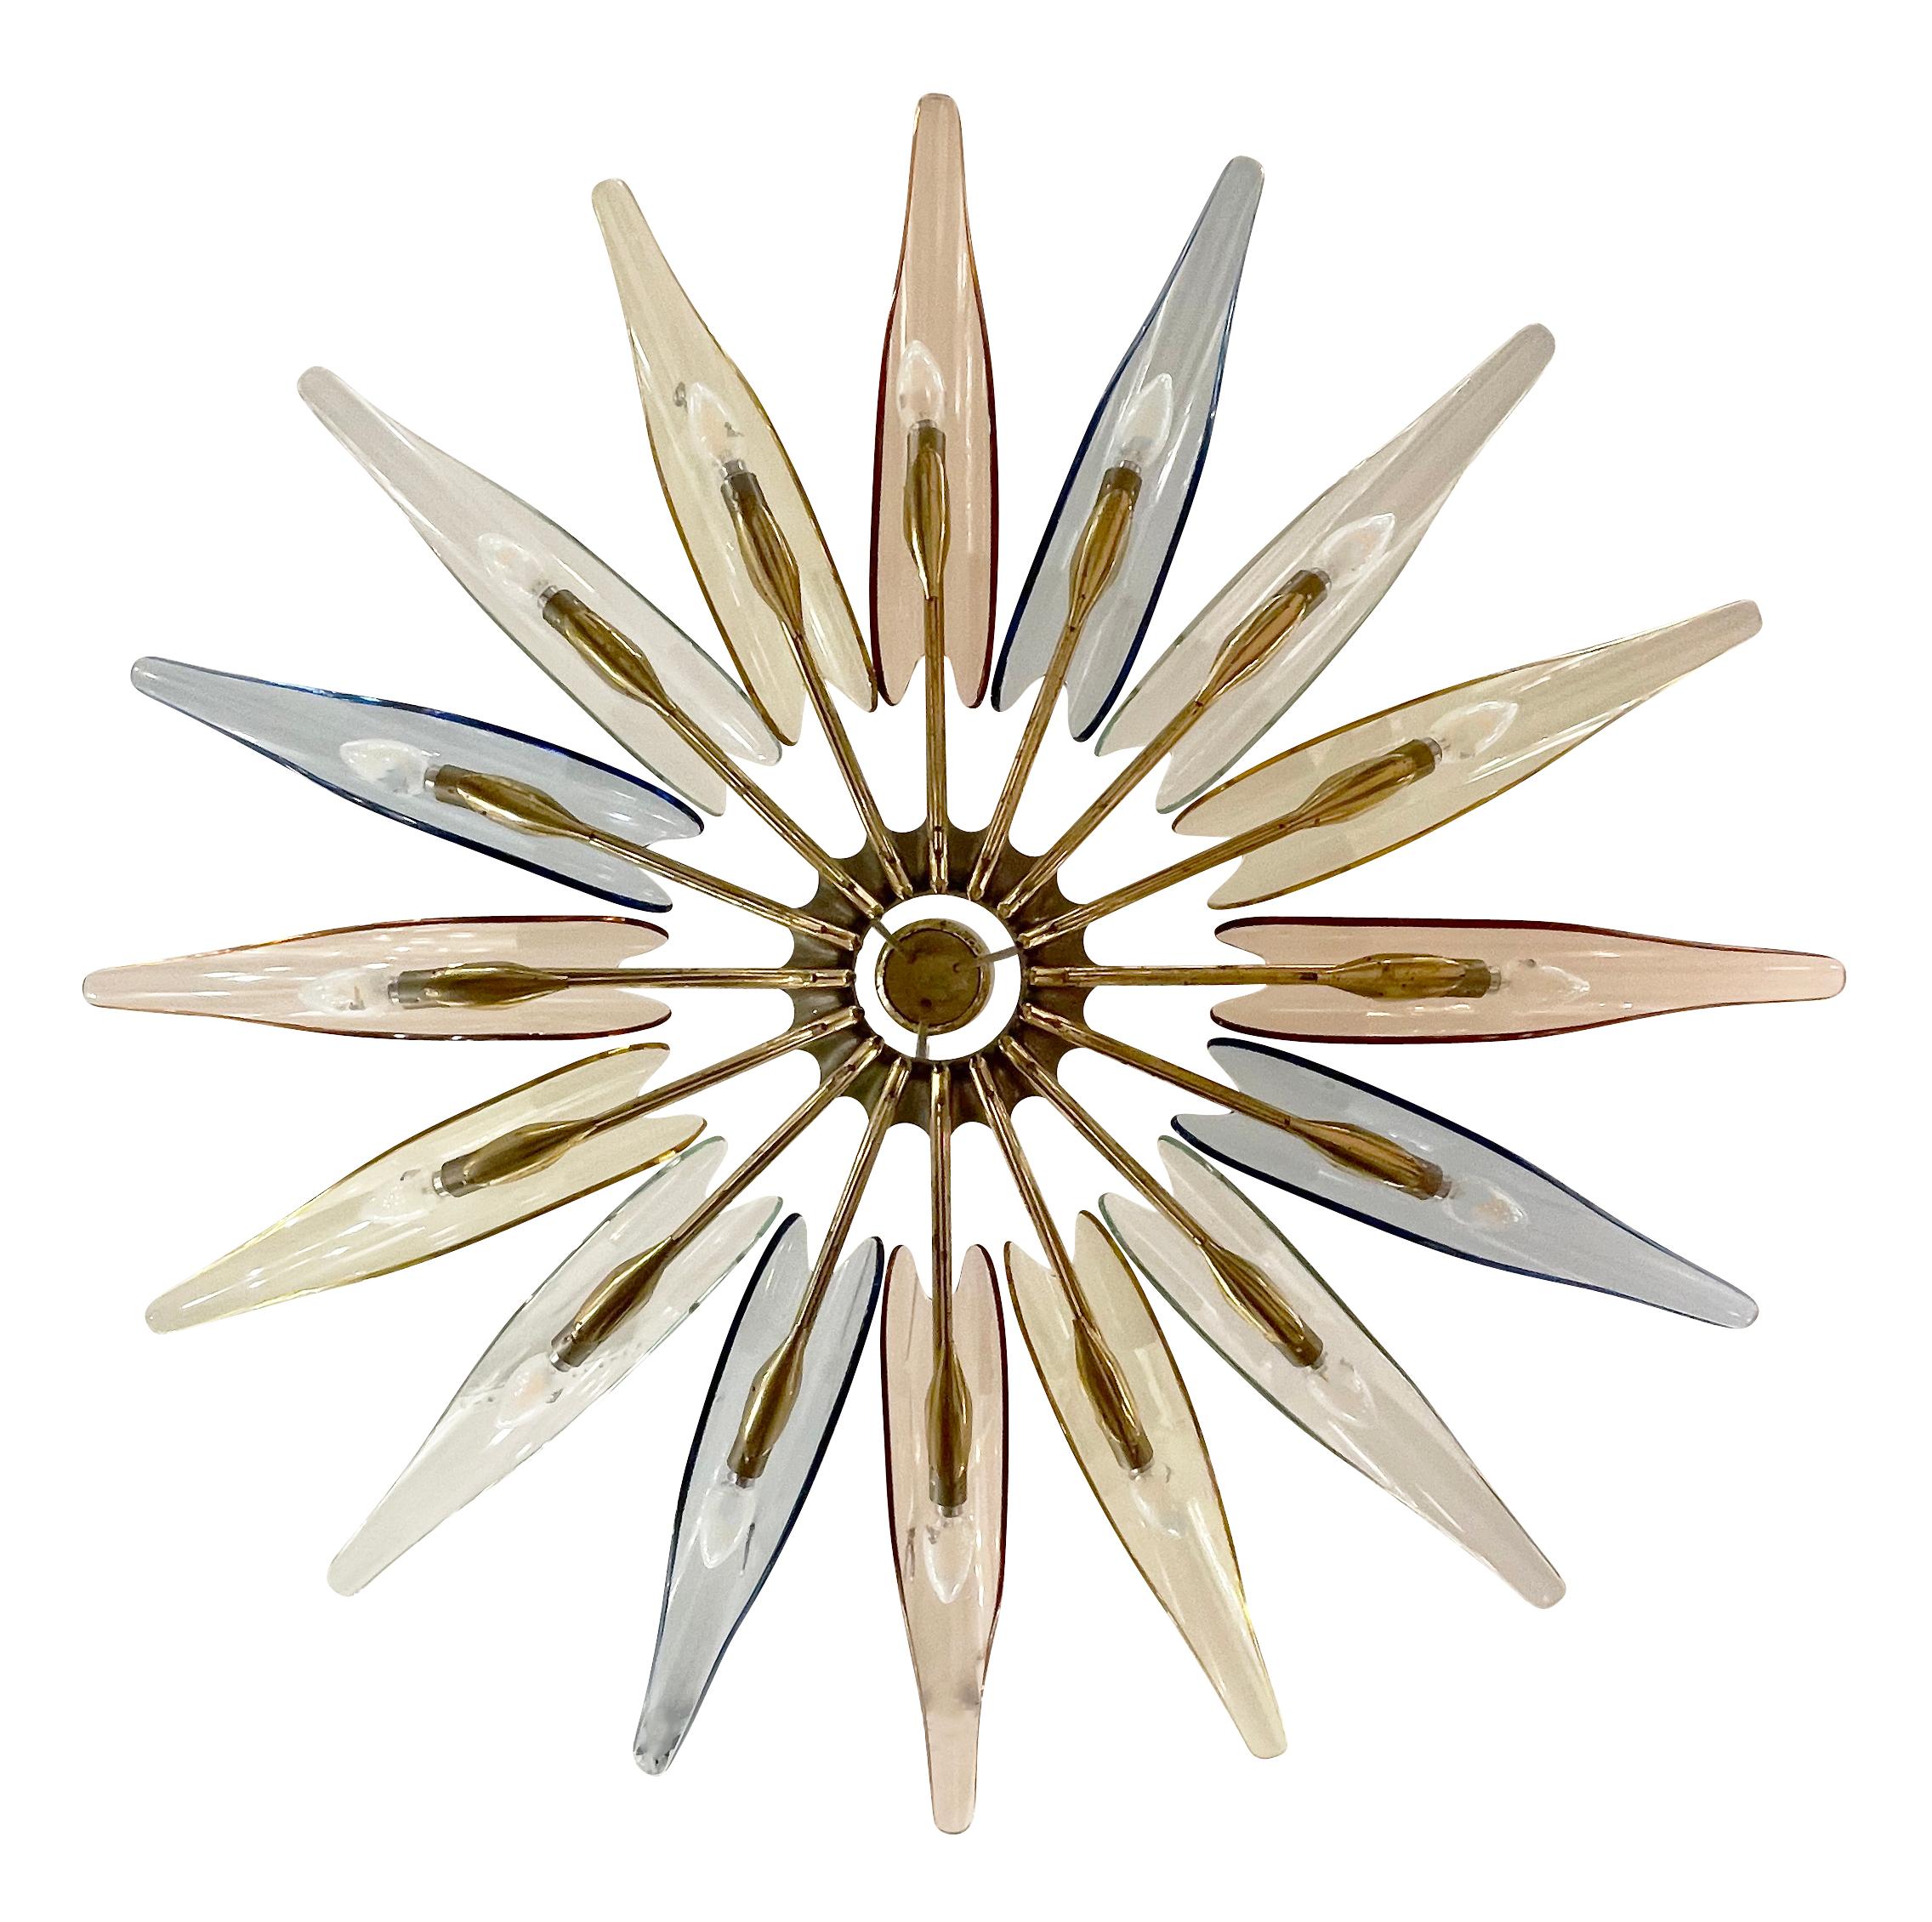 The Dahlia chandelier, Model 1563, designed by Max Ingrand for Fontana Arte in the 1950s is one of the most coveted and iconic pieces of Italian Mid-Century design. This multi-color example has alternating blue, rose, yellow and clear glass petals